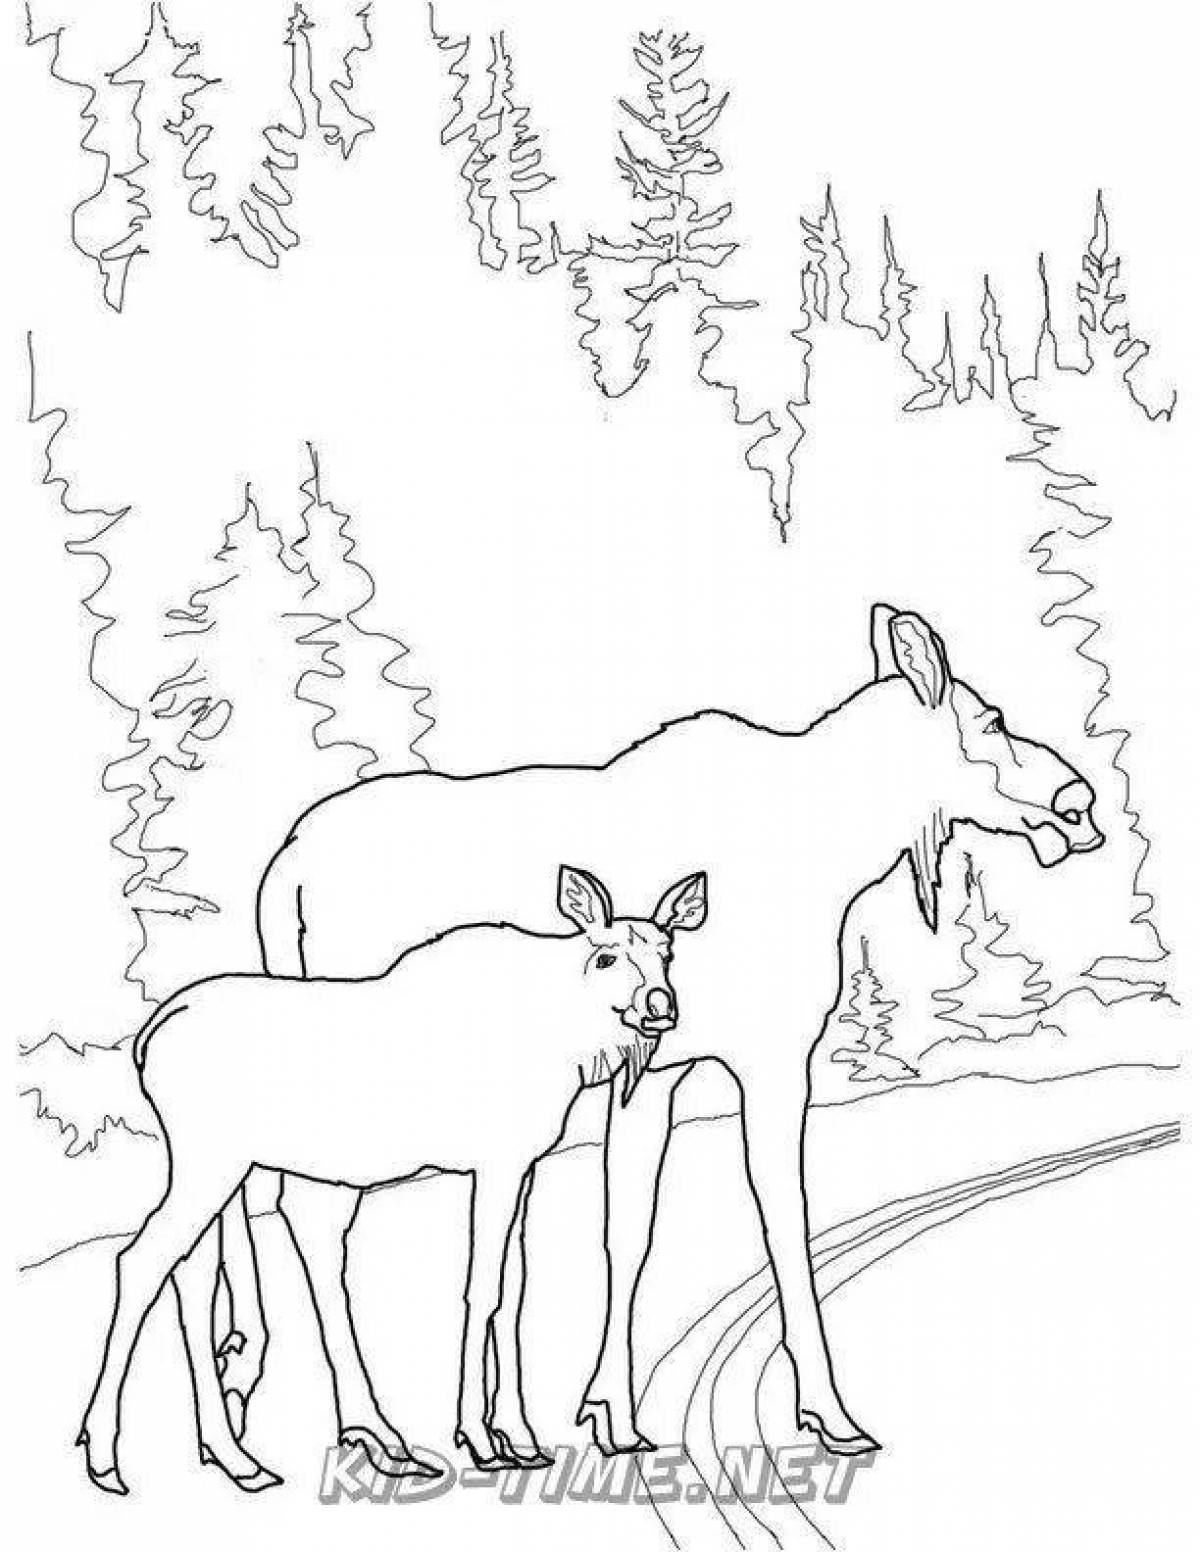 Funny wild animal and baby coloring page